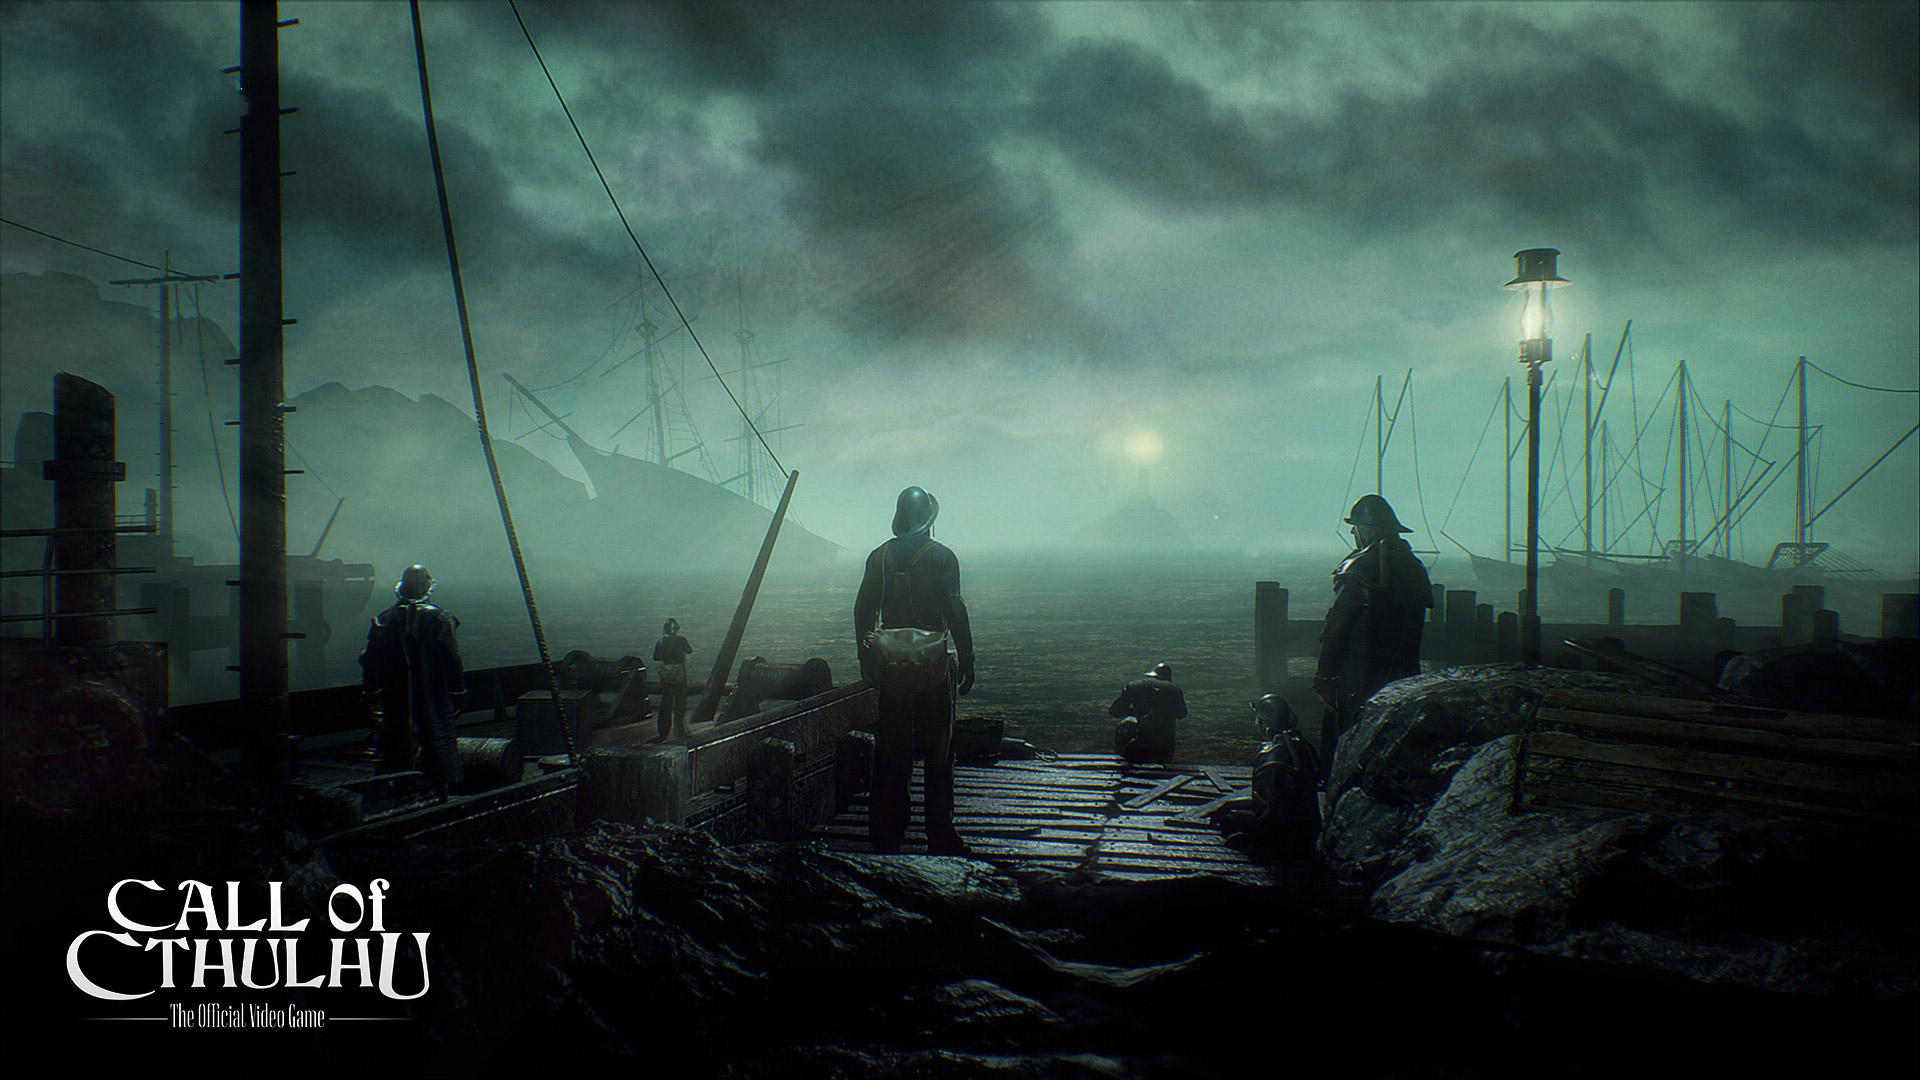 Free Call Of Cthulhu Wallpaper In - Call Of Cthulhu The Official Video Game , HD Wallpaper & Backgrounds